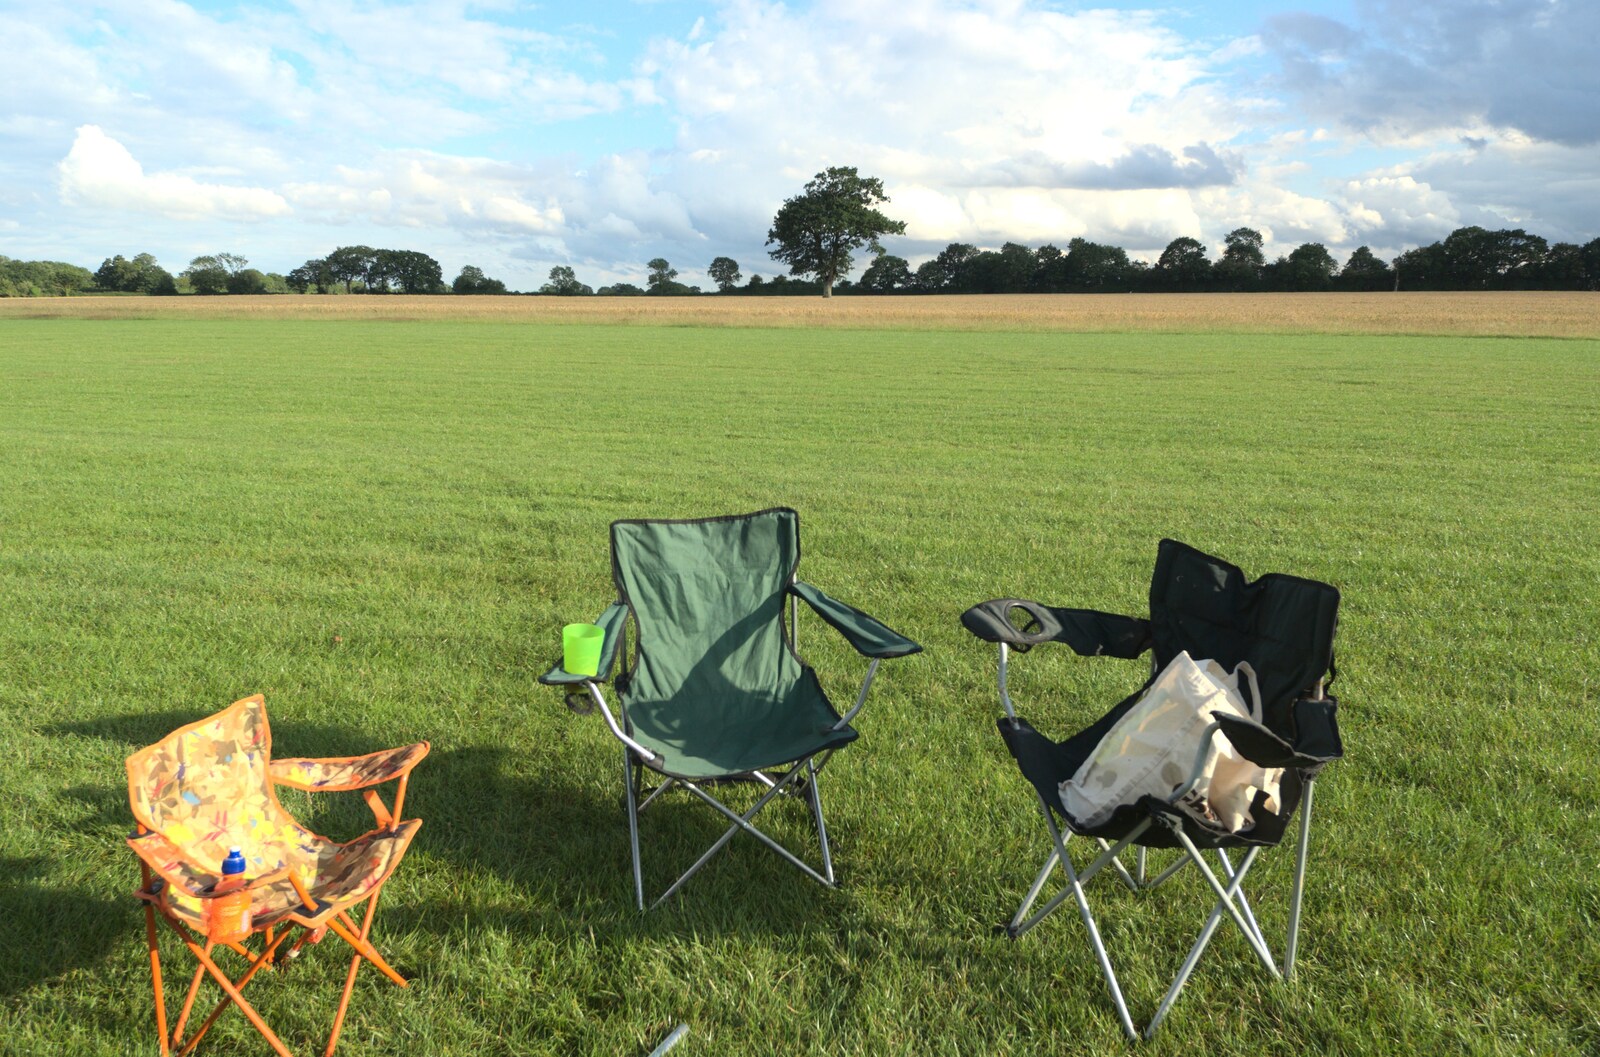 Camp-chairs on the runway from Maurice's Mustang Hangar Dance, Hardwick Airfield, Norfolk - 16th July 2011